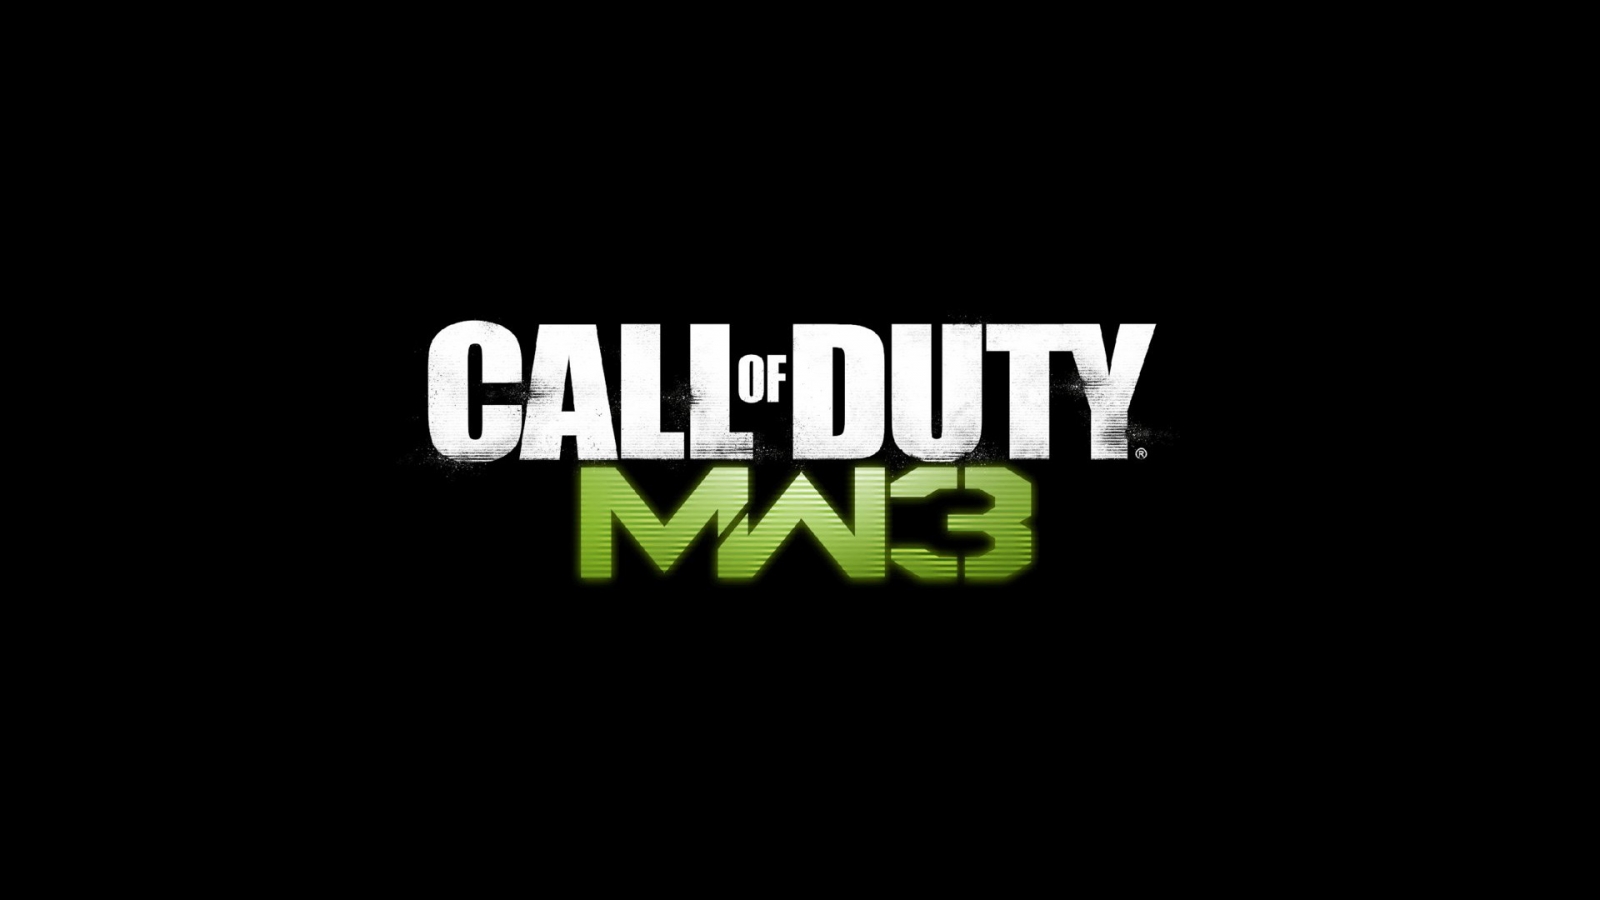 Call of Duty Modern Warfare 3 Game for 1600 x 900 HDTV resolution